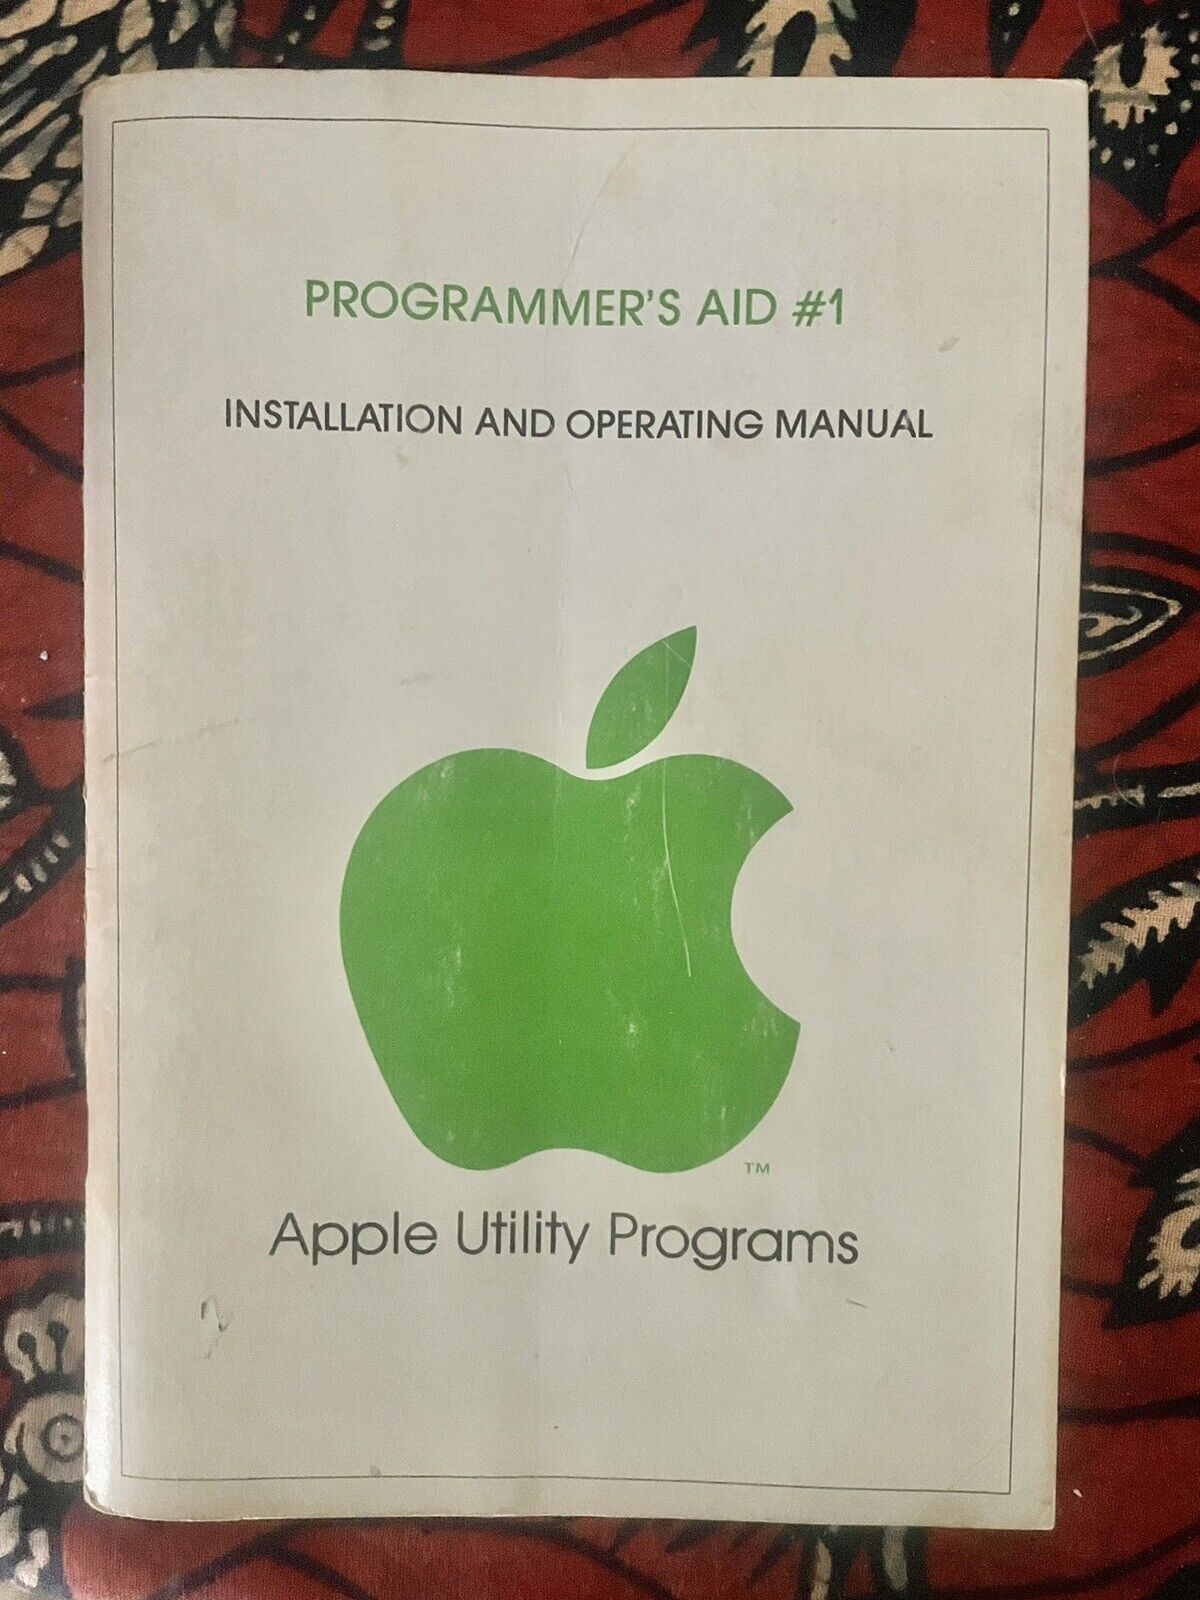 Apple Utility Programs – Programmer’s Aid #1 Installation and Operating Manual